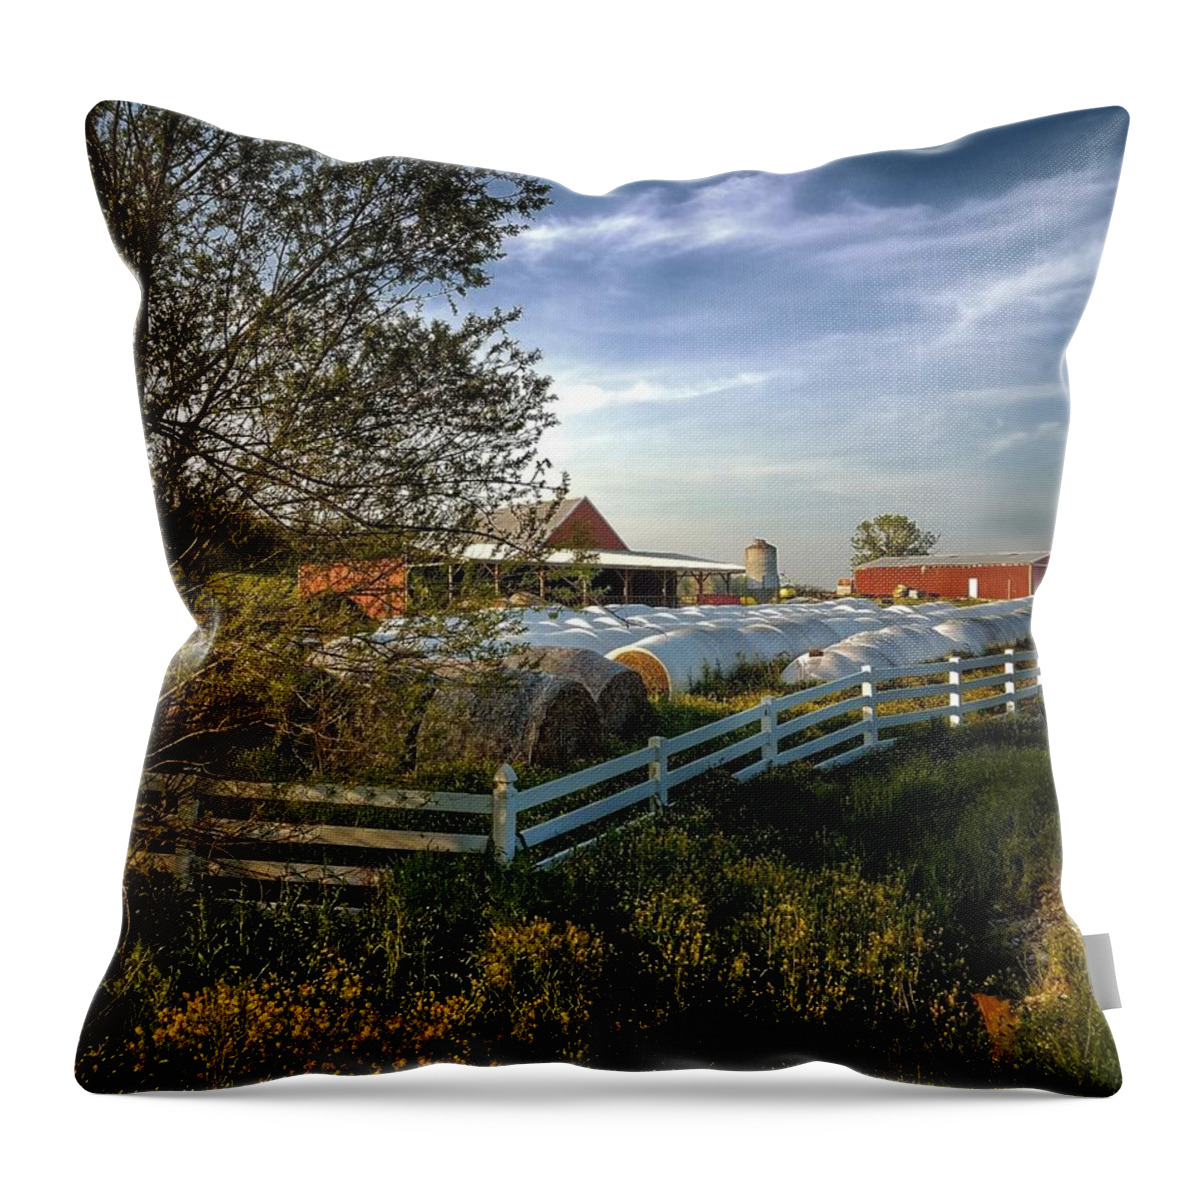 Landscape Throw Pillow featuring the photograph White Picket Fence Farm by Angela Comperry